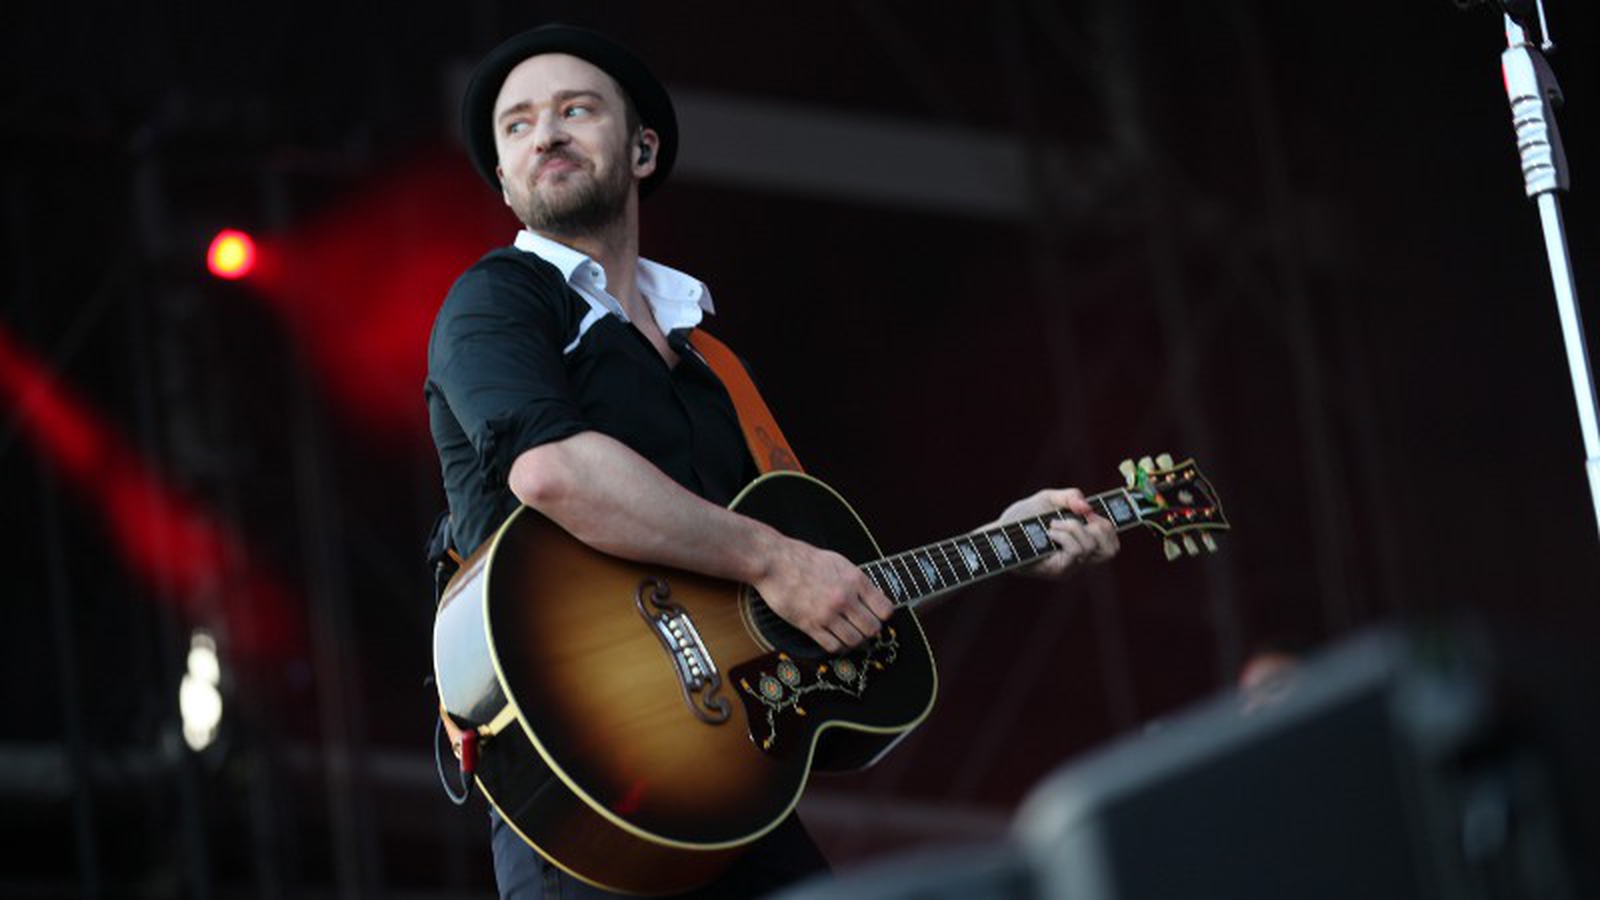 Justin Timberlake works with Marcus Mumford on new Coen Brothers